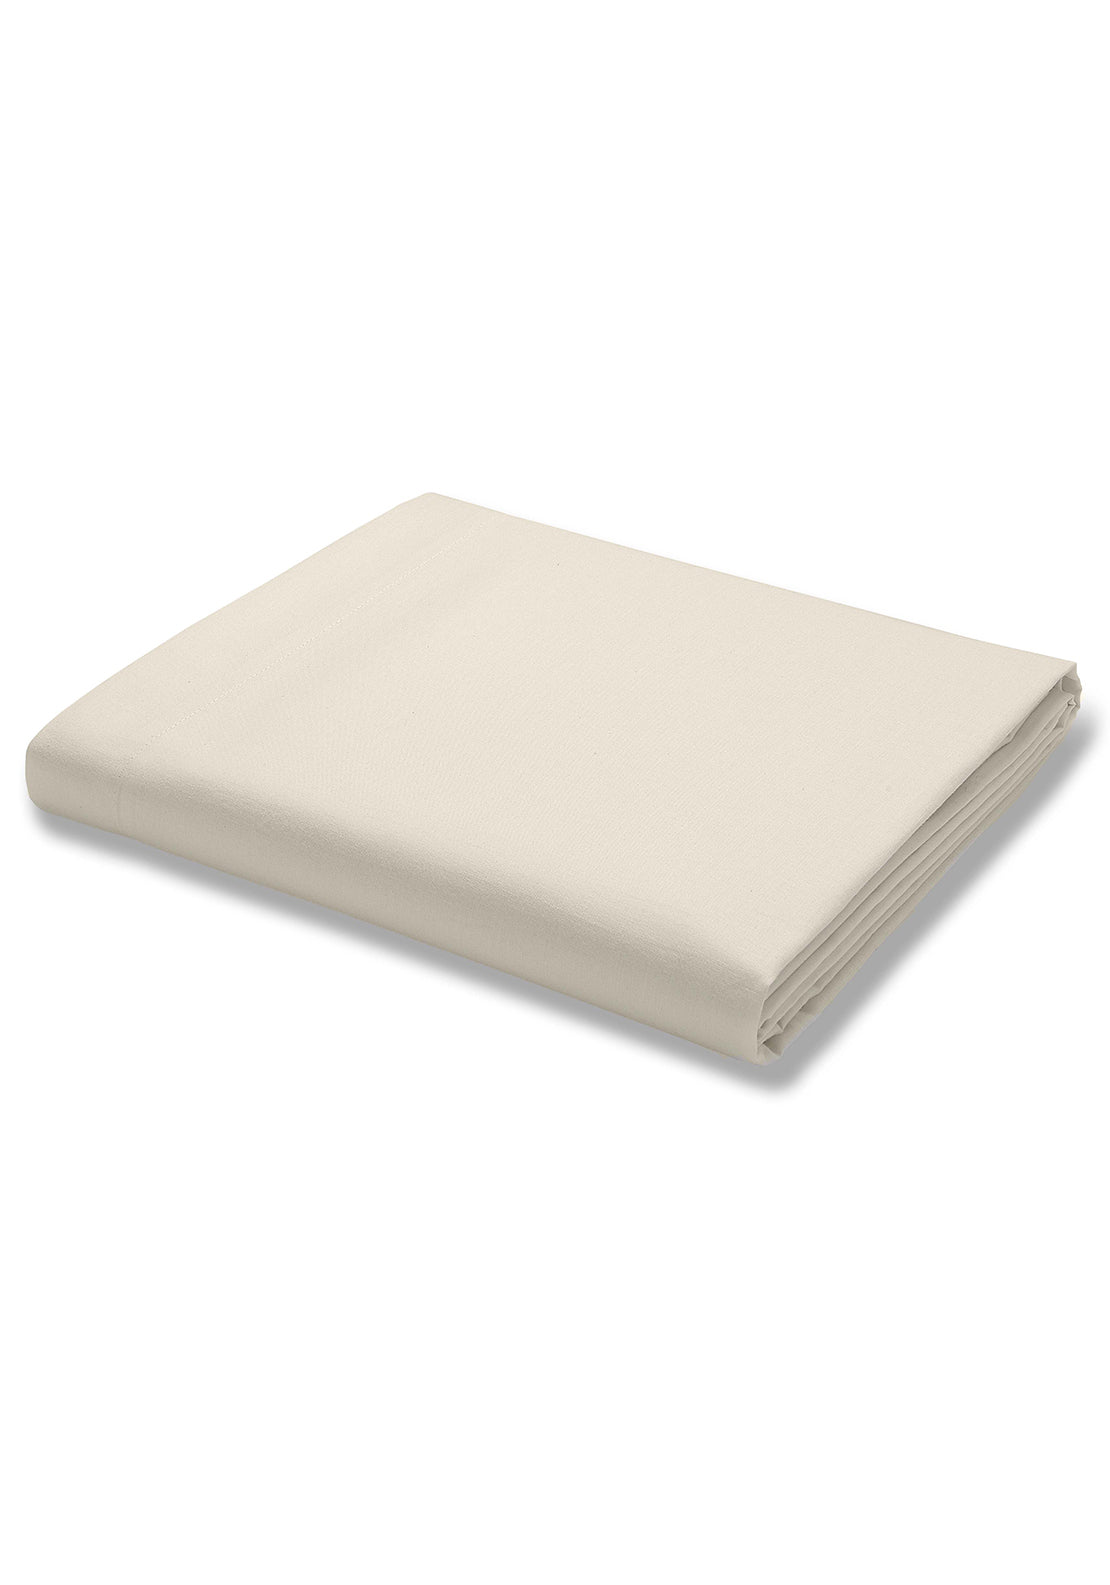 The Home Collection 300 Thread Count Flat Sheet - Cream 1 Shaws Department Stores